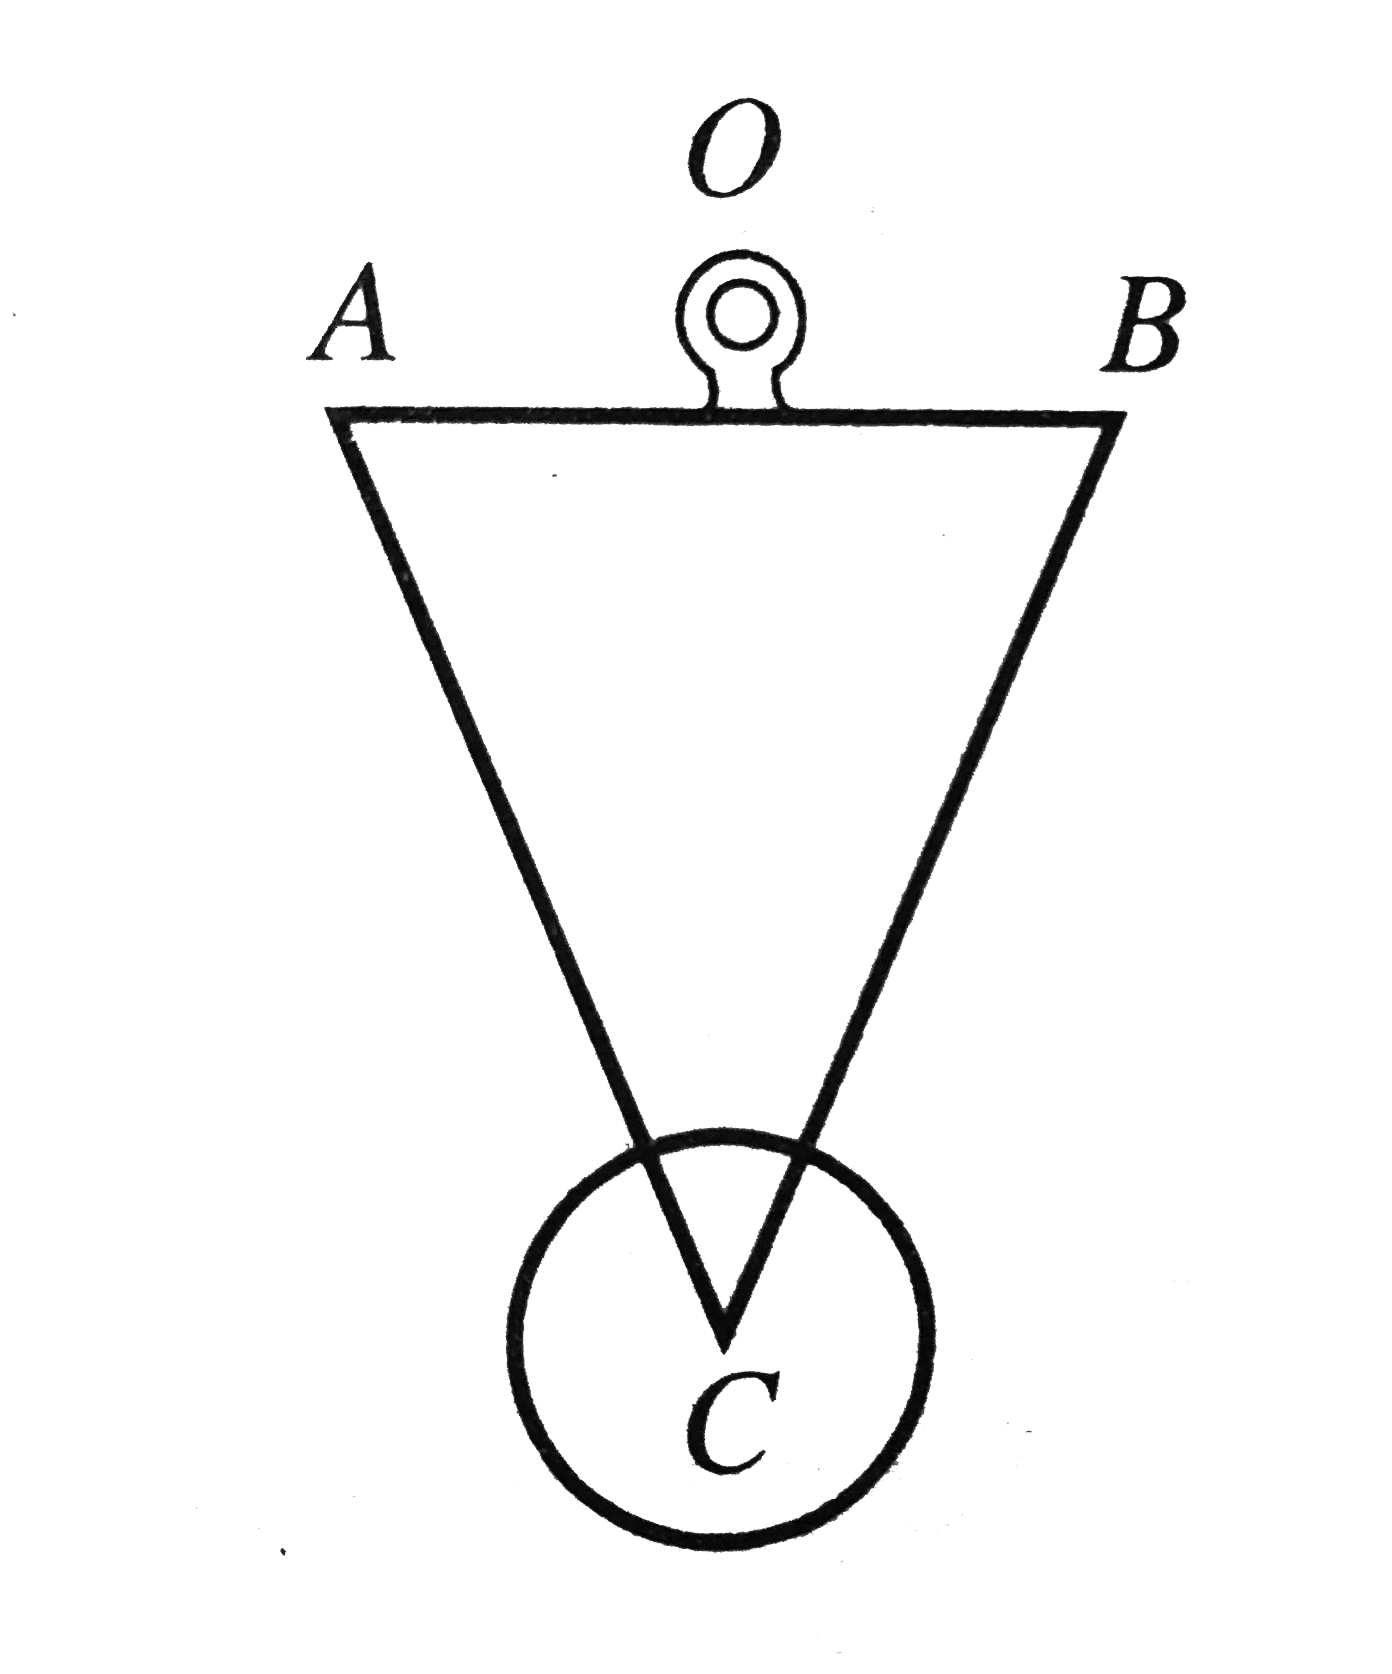 A compensated pendulum shown if Fig. is in the from of an isosceles Delta of base length l1=5cm and coefficent of linar expansion alpha1=18xx10^-6 and side length l2 and coefficient of linear expansion alpha2=12xx10^-6. find l2 so the the distance of centre of mass of the bob from suspension centre O may remain the same at all the temperature.